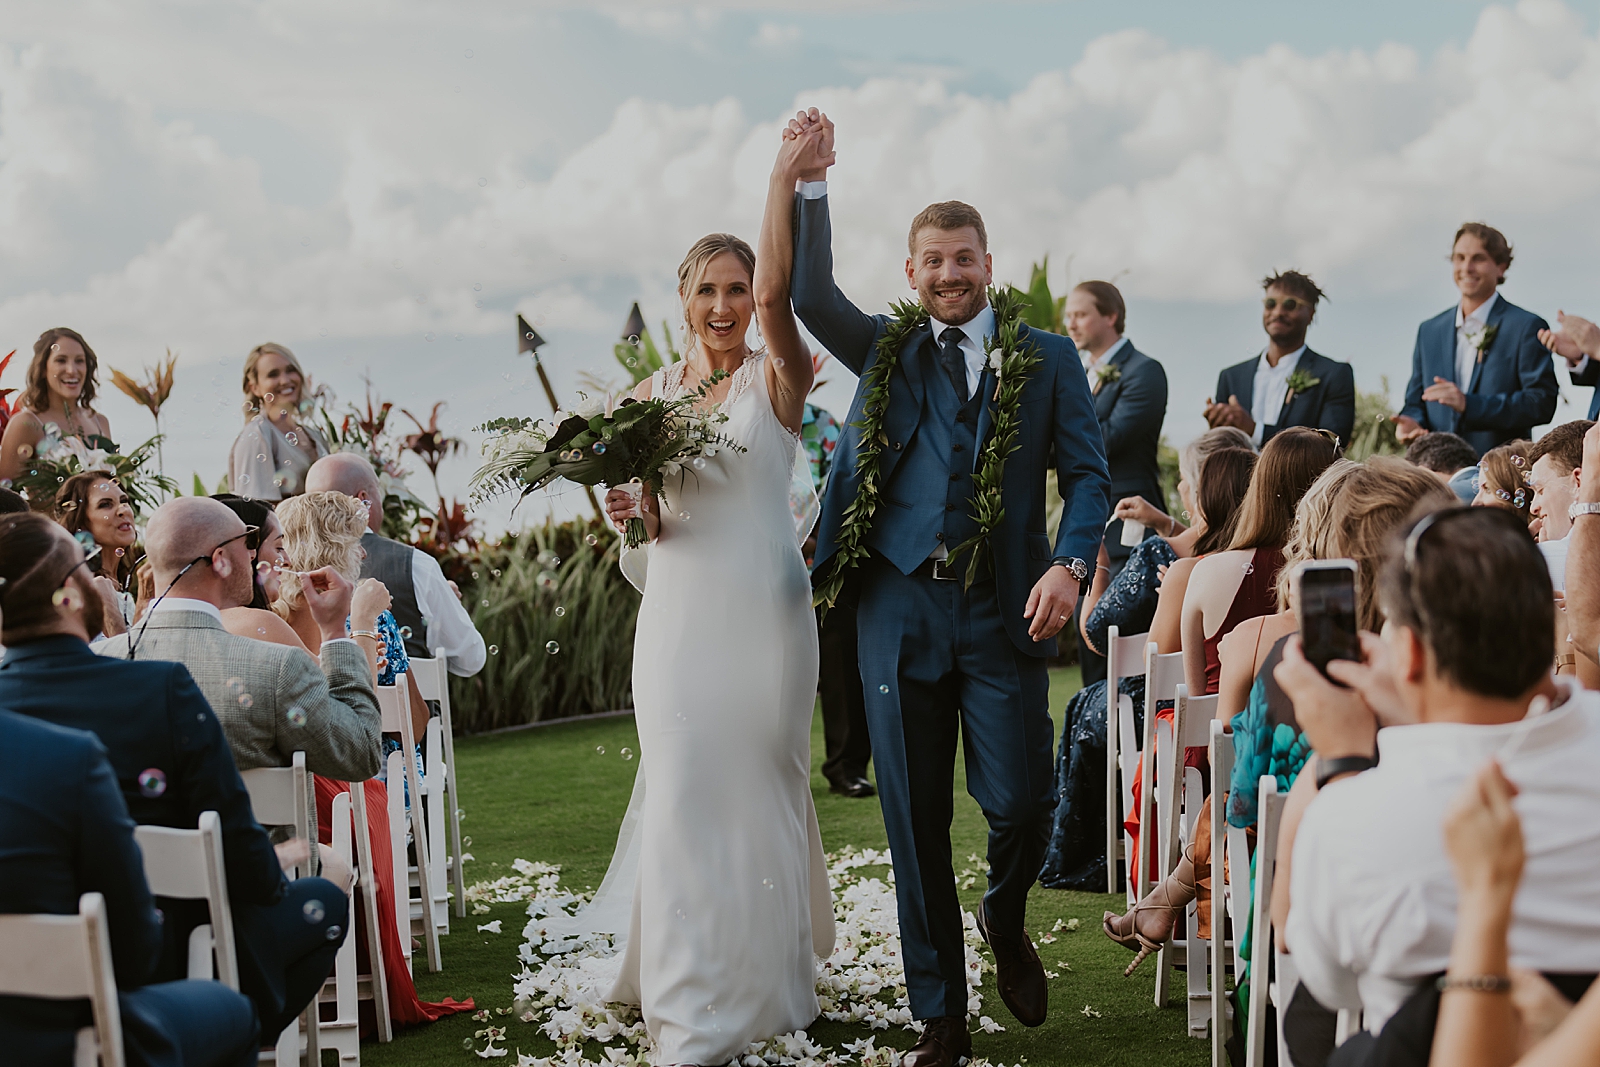 Quirky Bride and Groom holding hands up celebrating exiting Ceremony